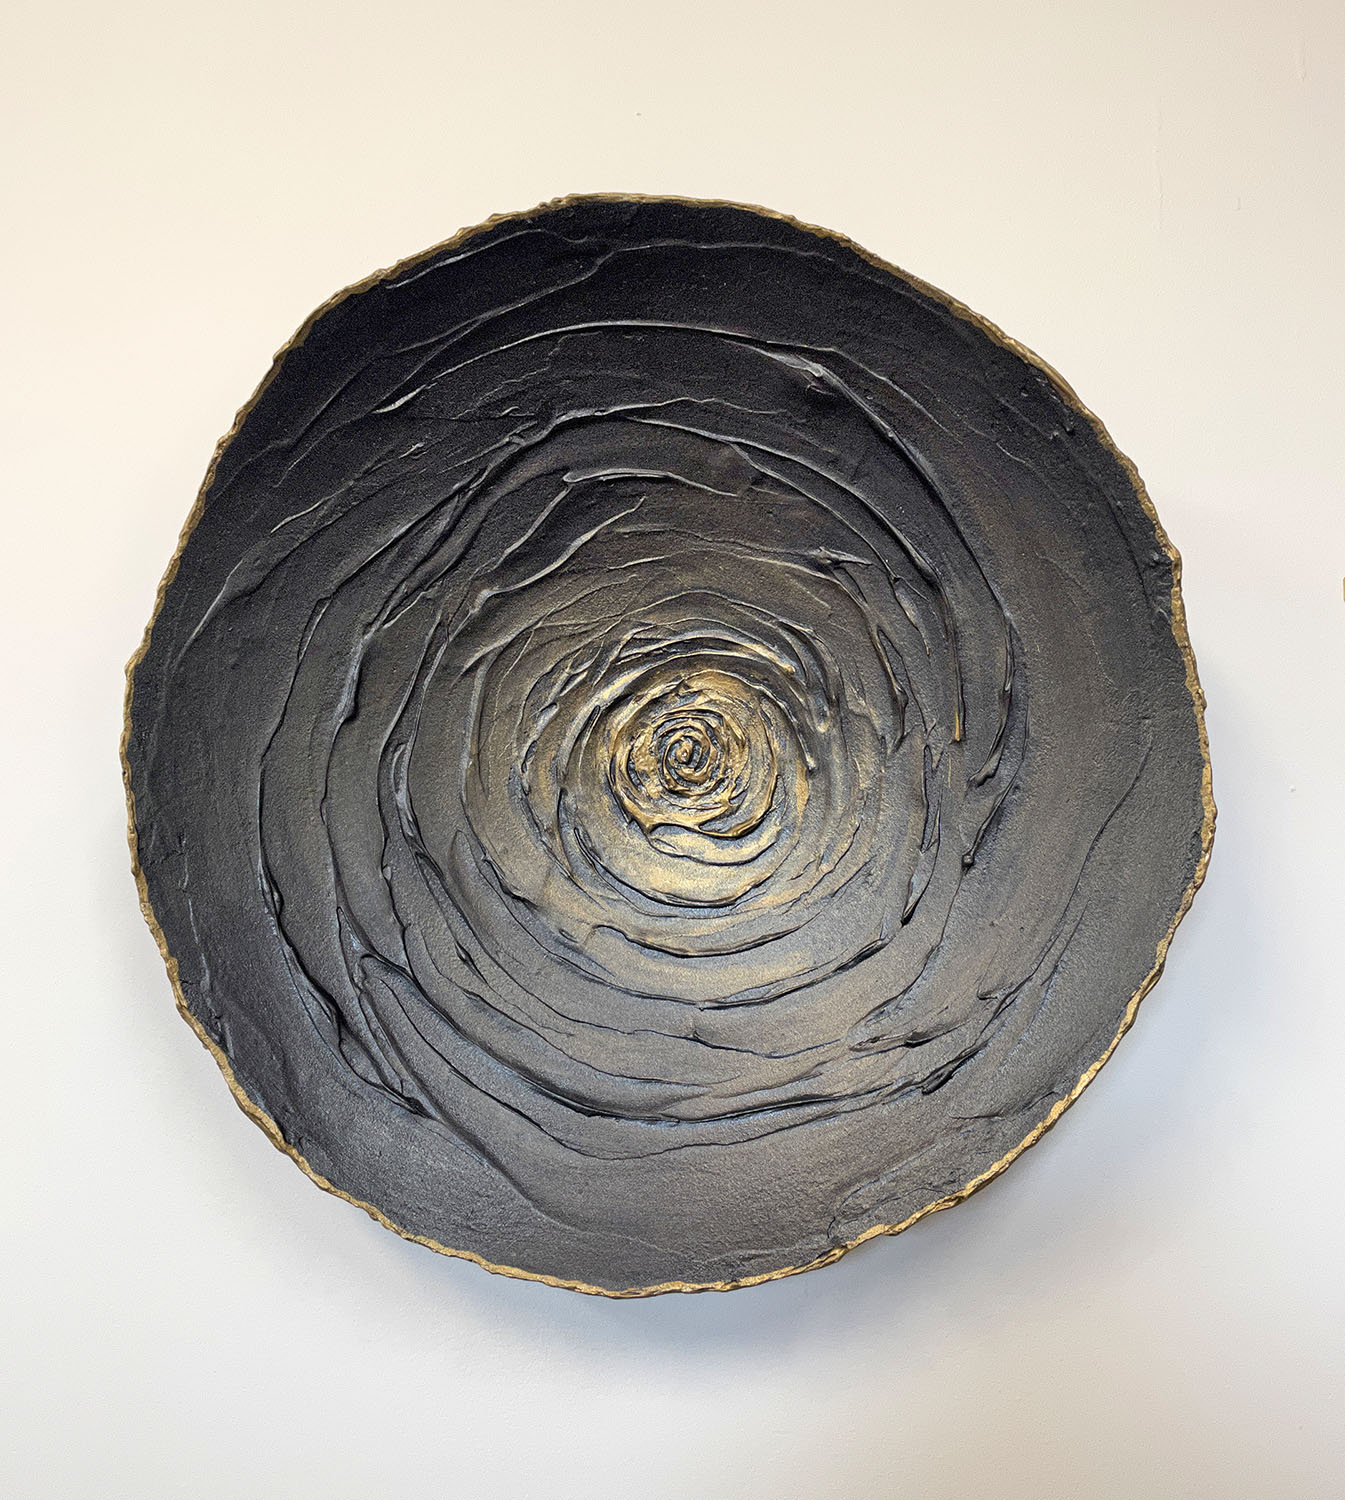 Darkness Eludes Me - Abstract Rose Wall Vessel